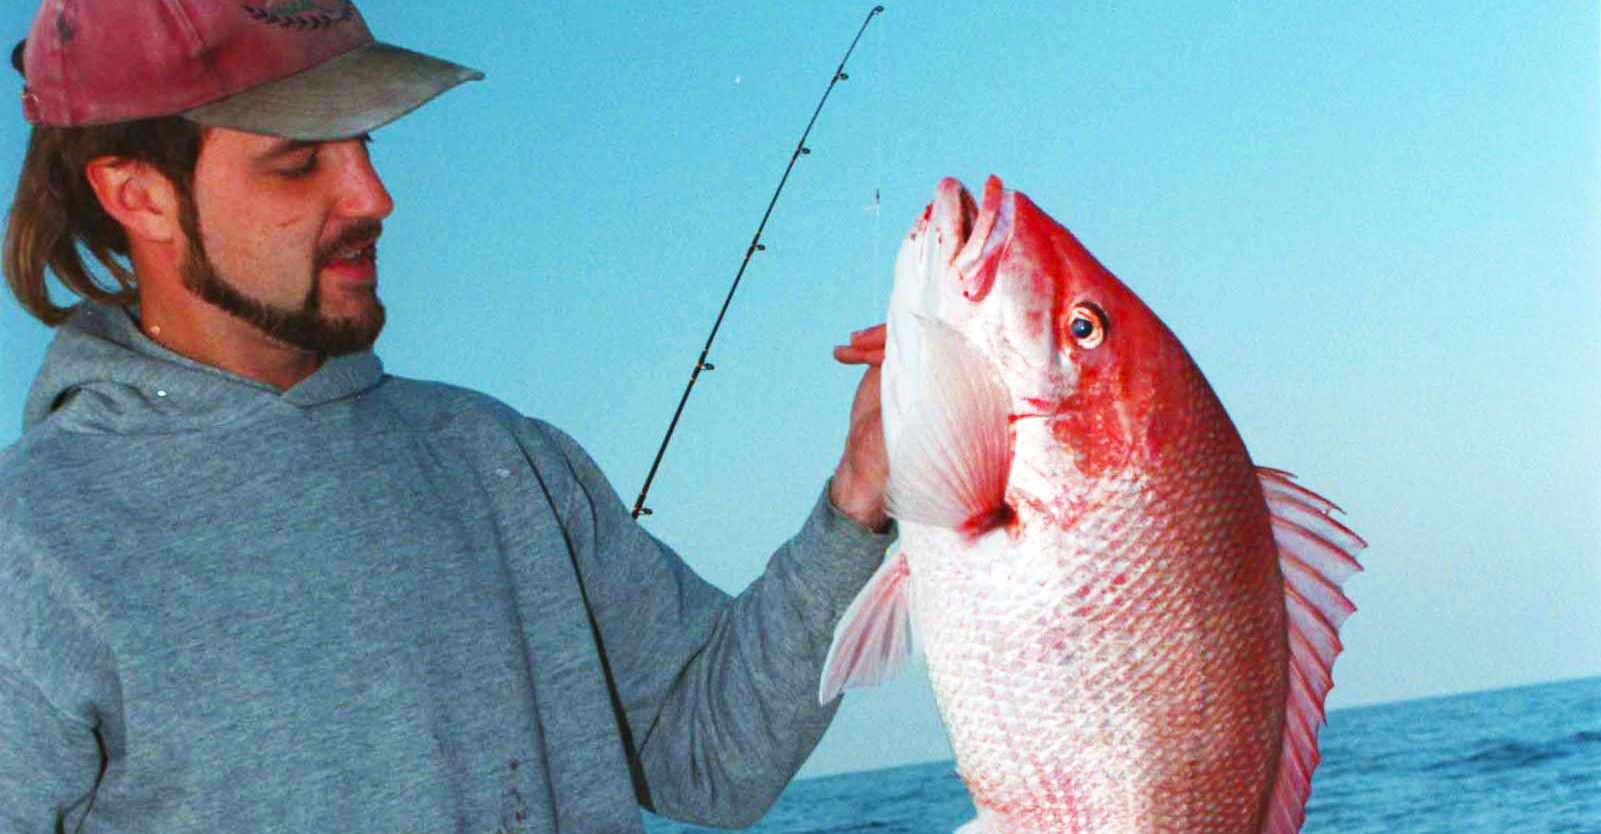 TPWD sets federal red snapper season